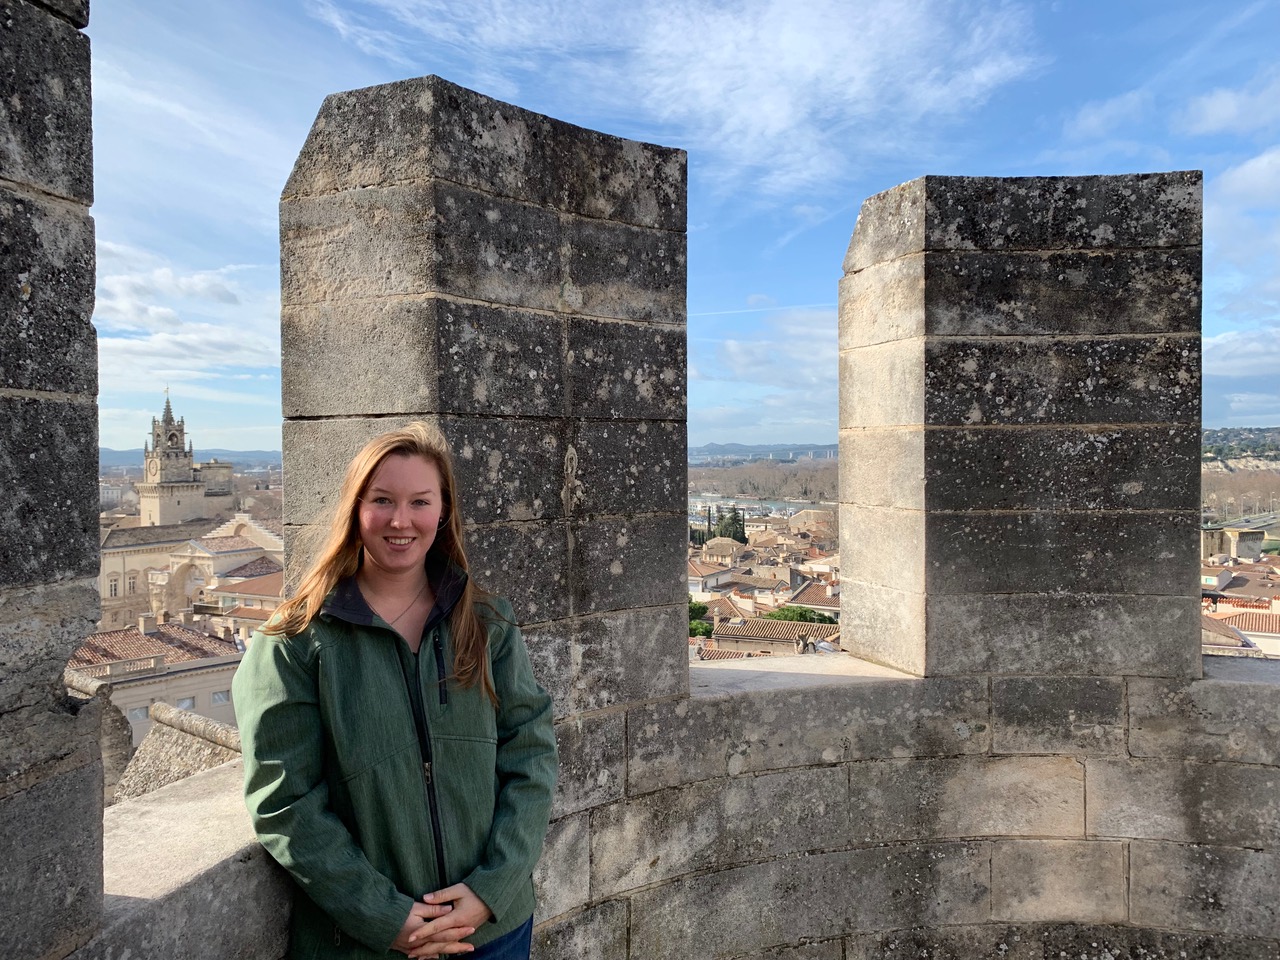 Maddie on the tower of the Palace of the Popes